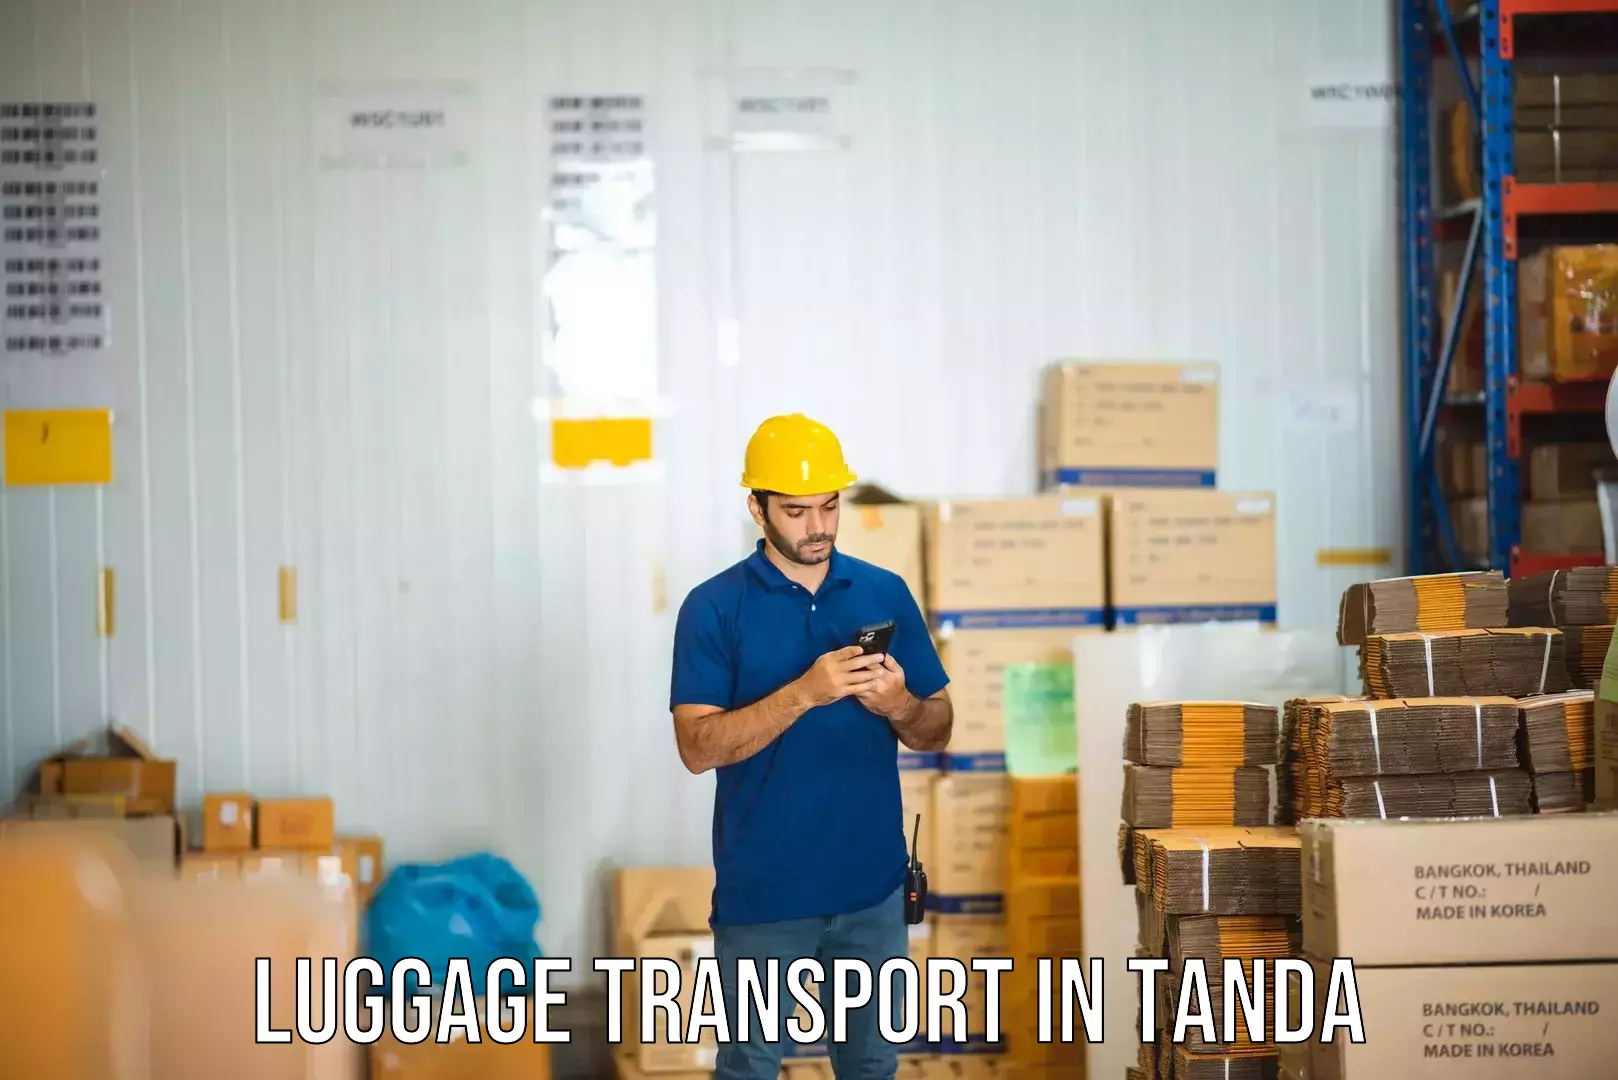 Luggage transport operations in Tanda